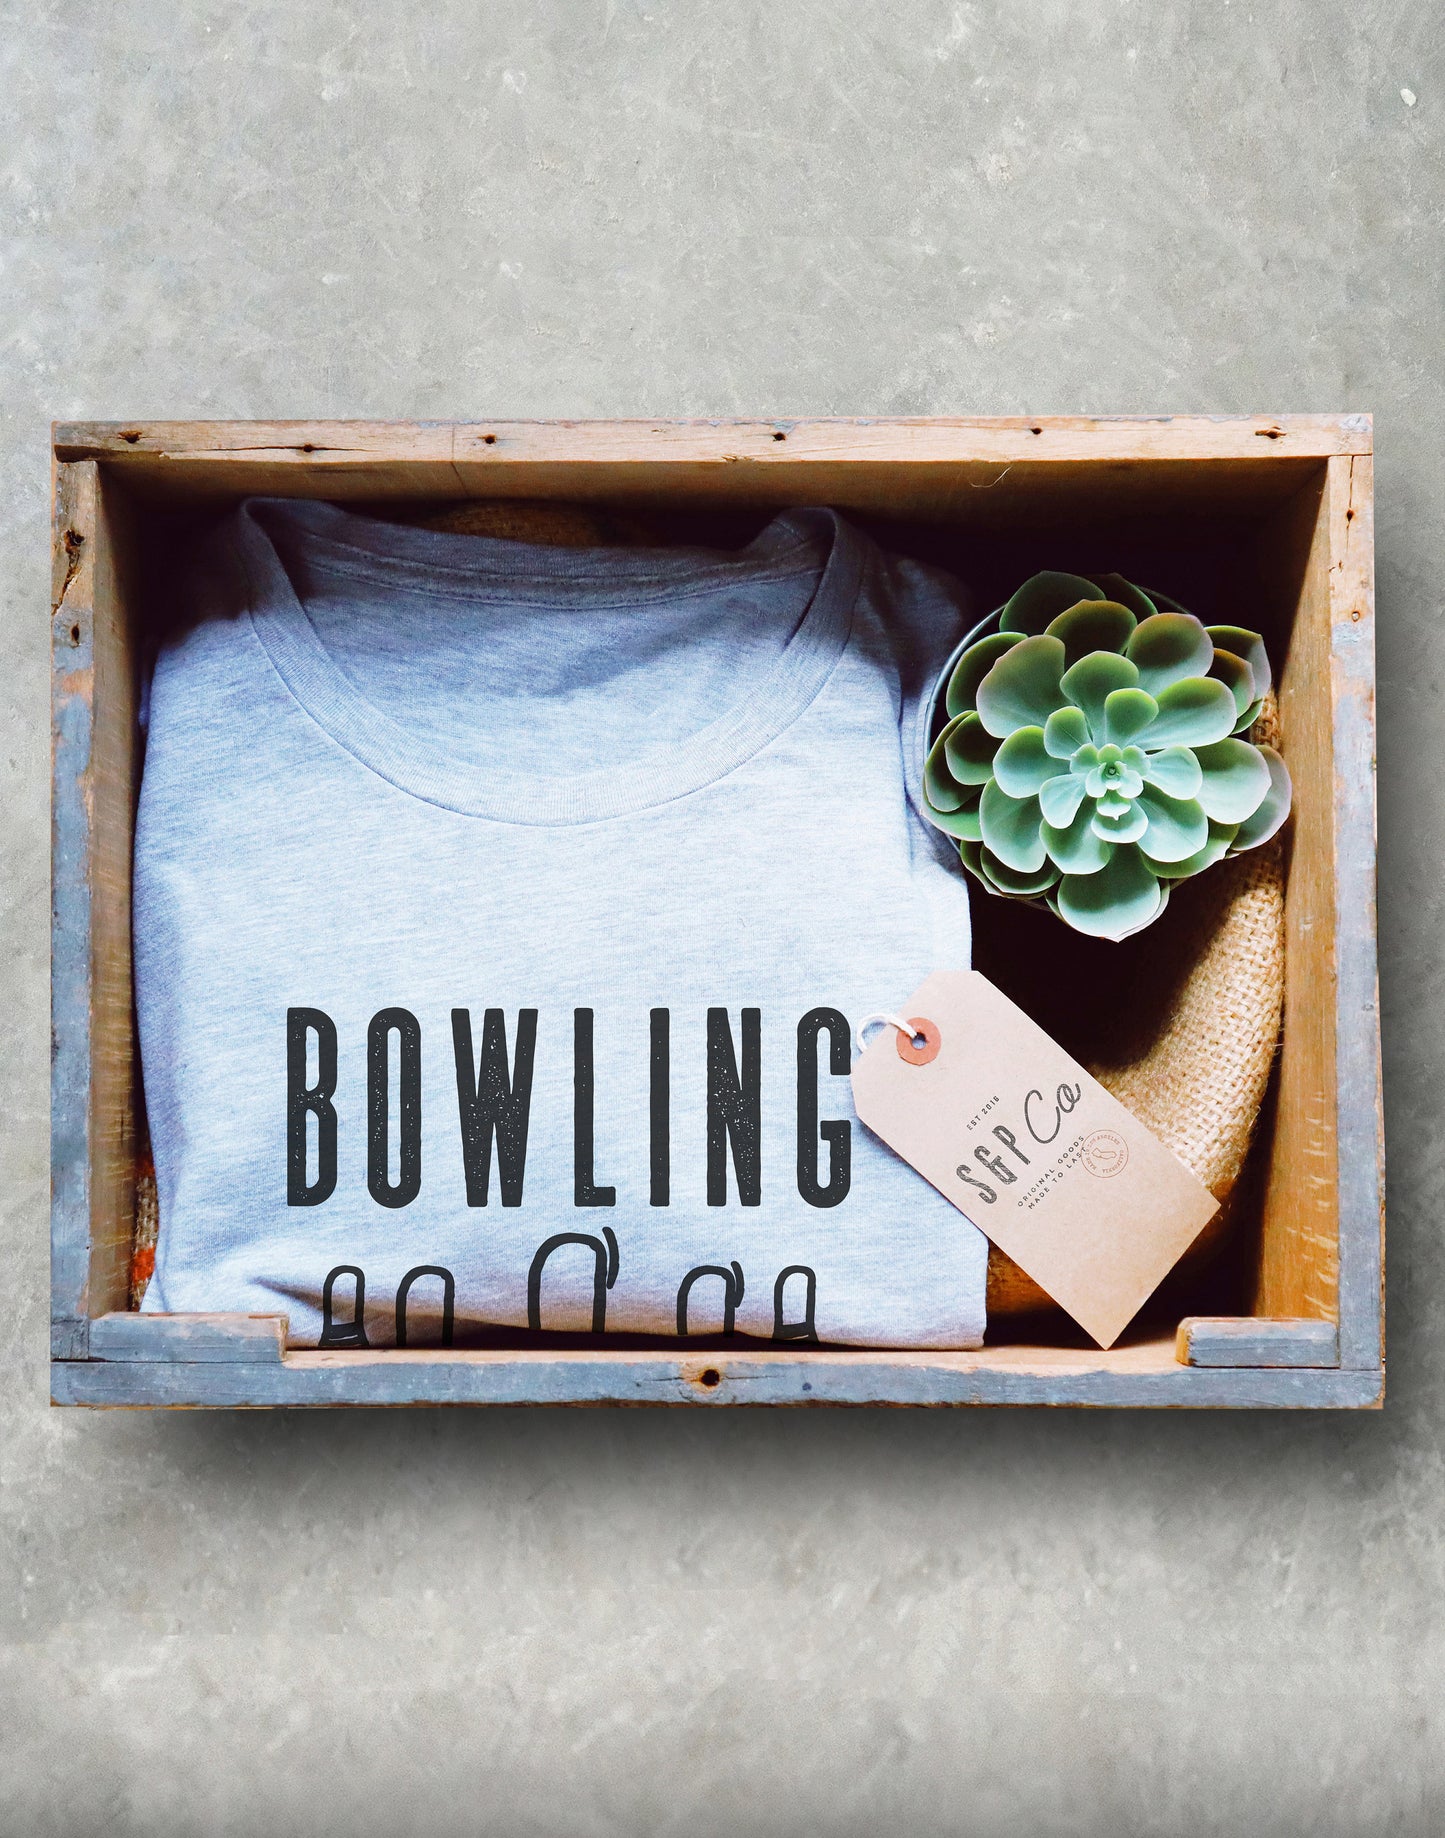 Bowling Is Right Up My Alley Unisex Shirt - Bowling Shirts, Bowling Gifts,  Bowling Party, Bowling Alley, Sports Shirt, Ten Pin Bowling Gift